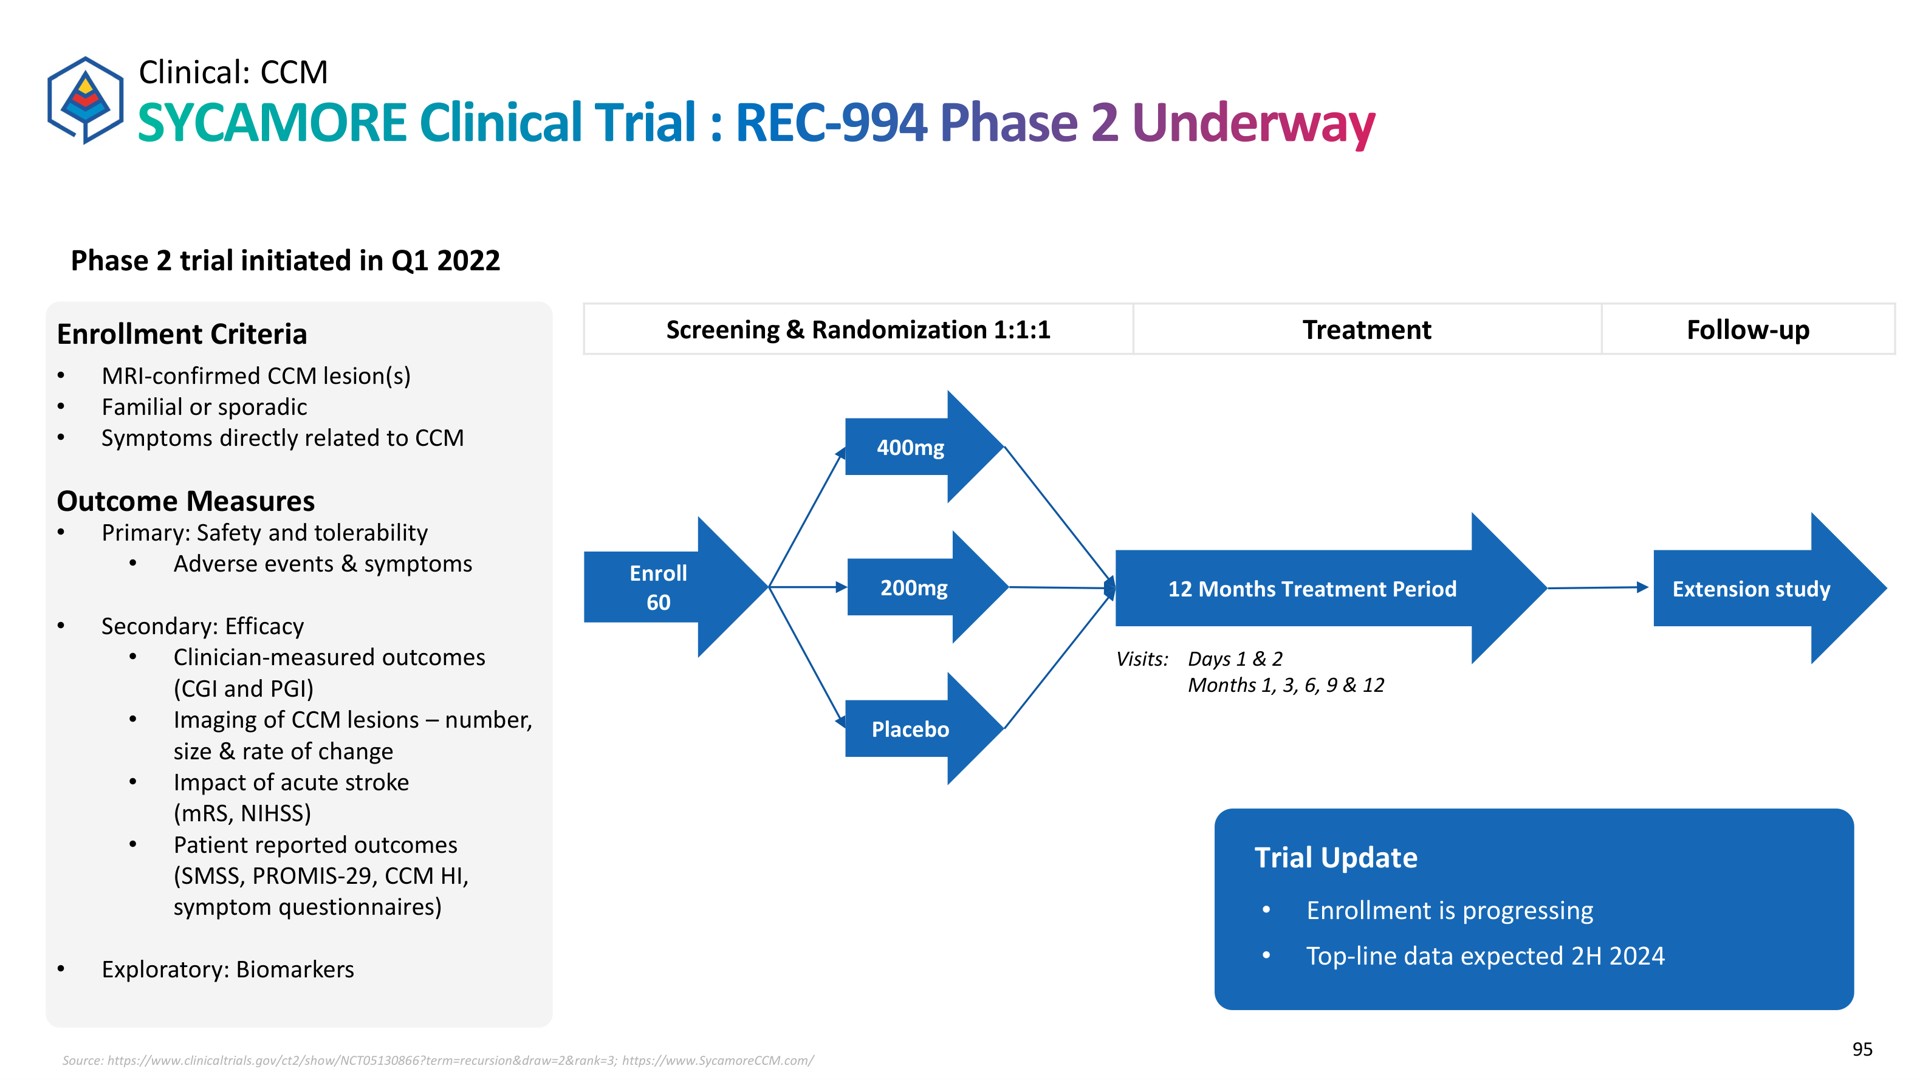 clinical phase trial initiated in enrollment criteria outcome measures trial update sycamore underway | Recursion Pharmaceuticals